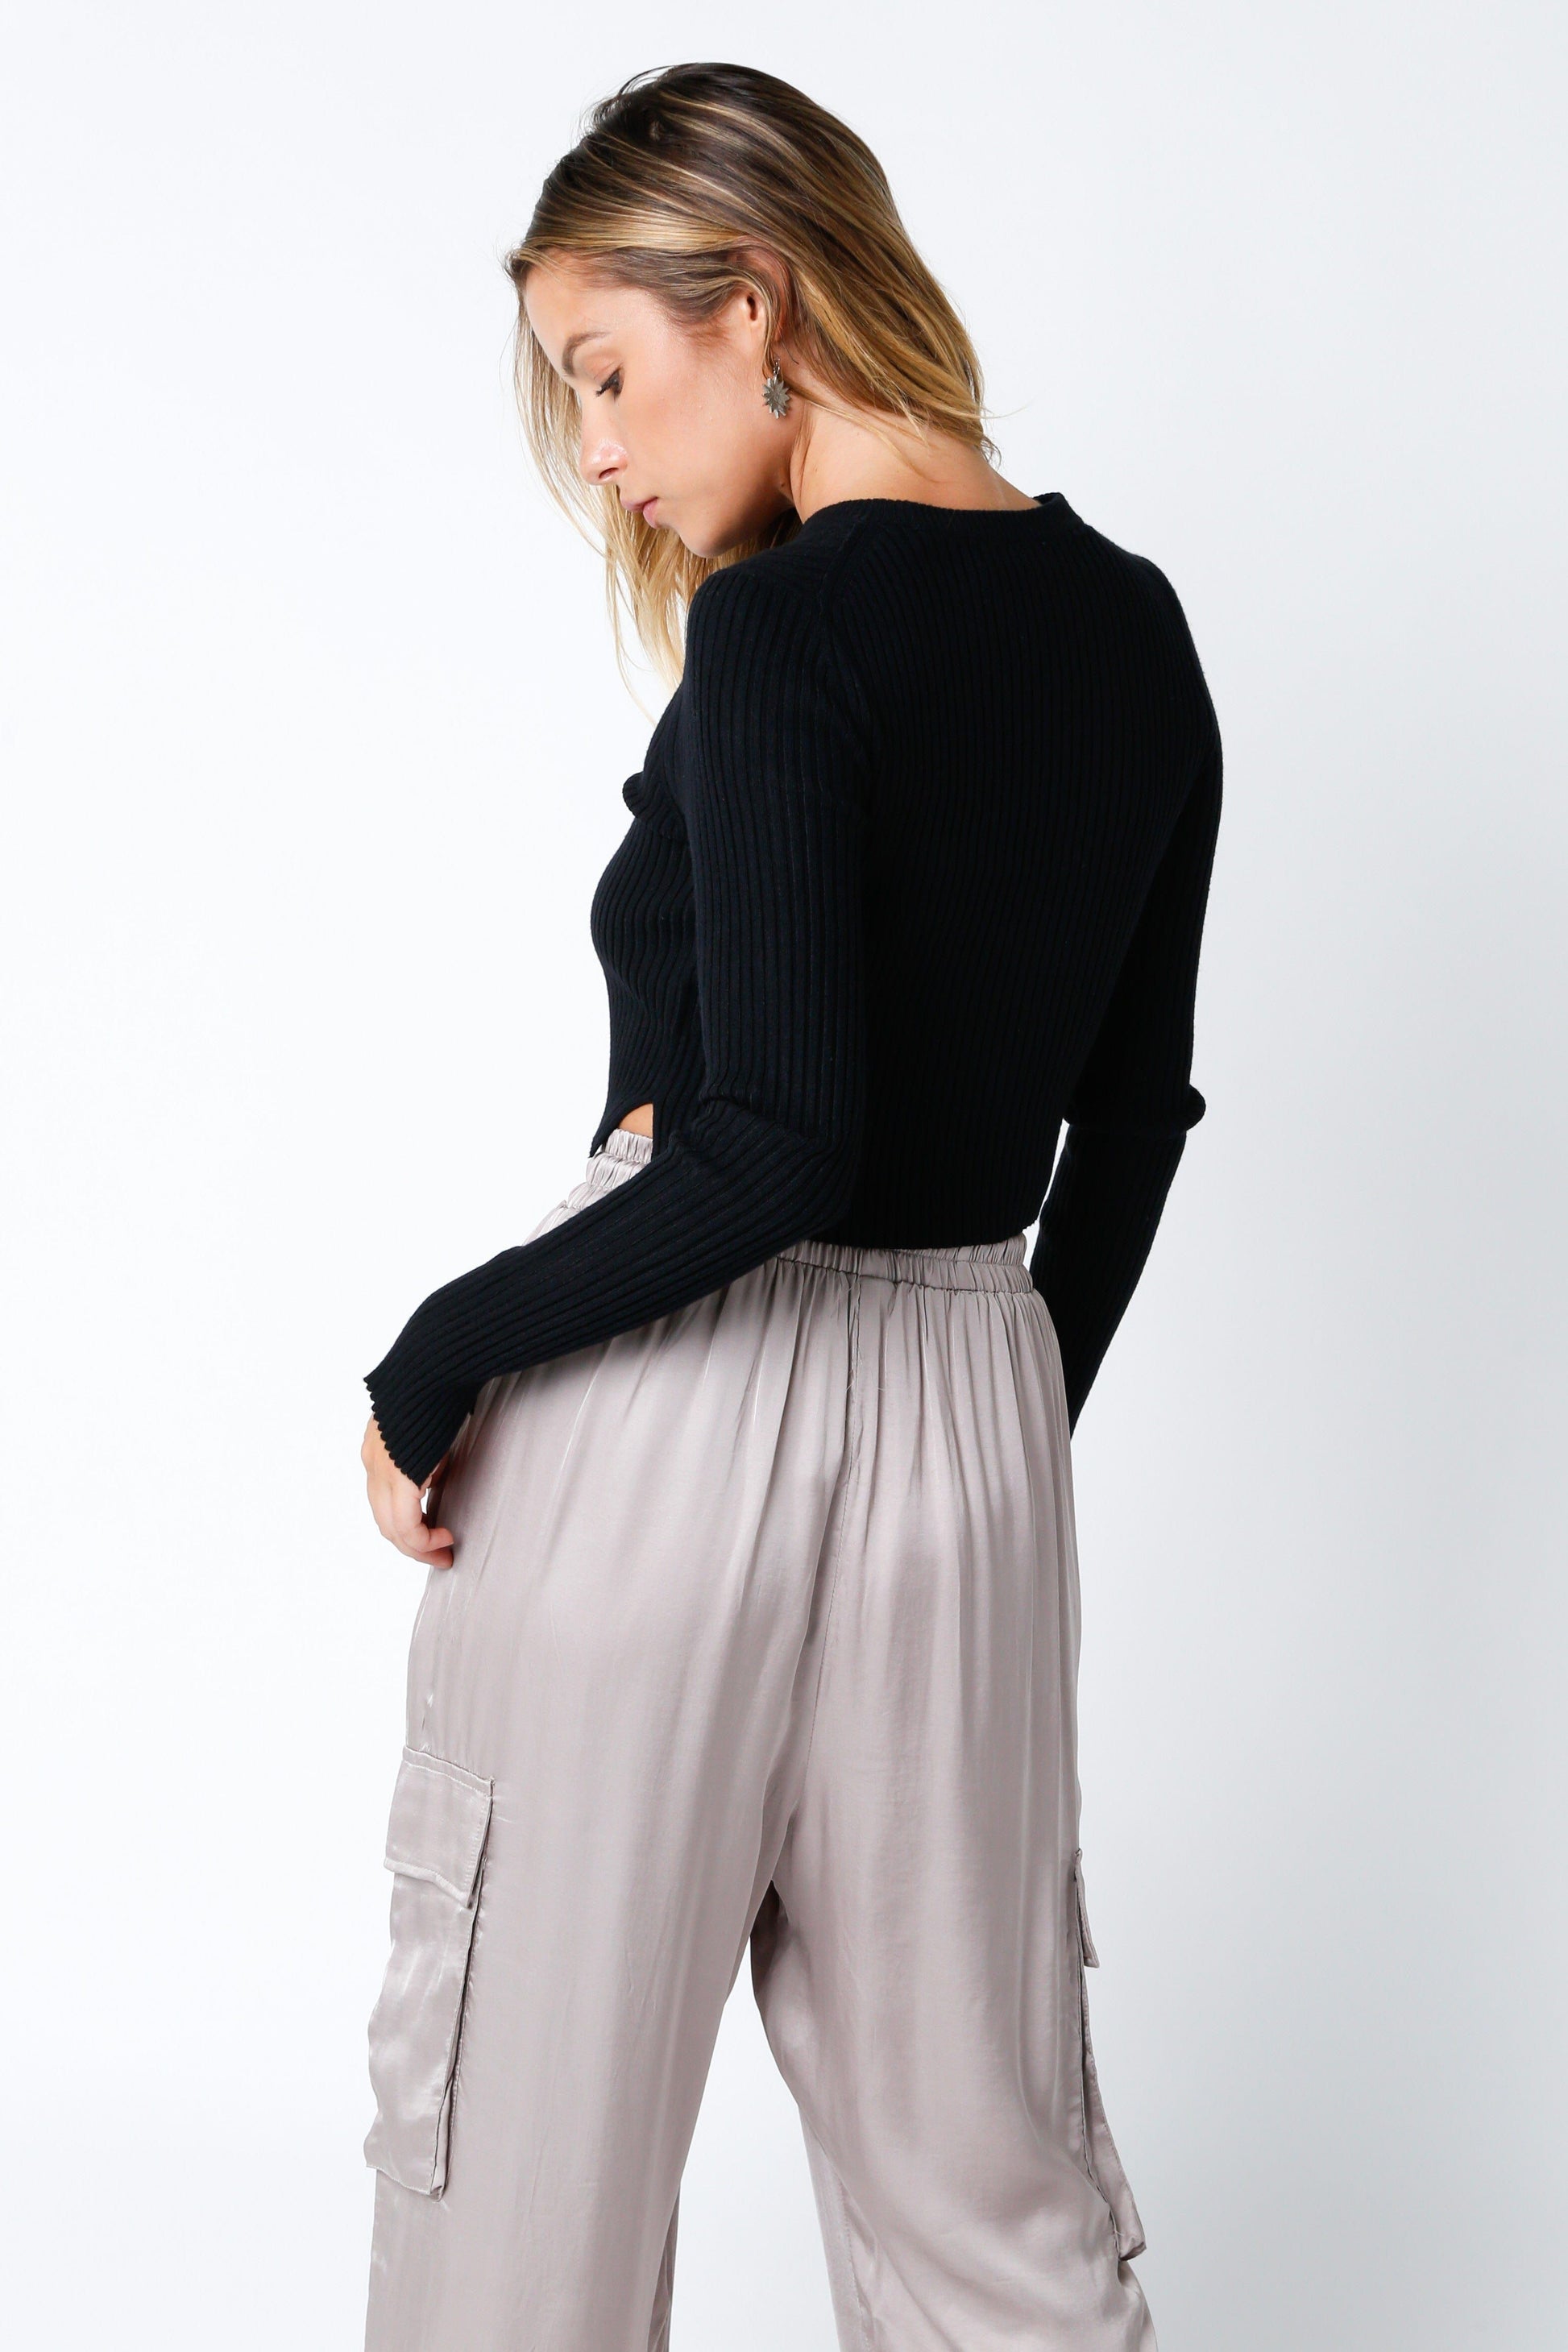 Olivaceous Olivaceous Kendra Crop Sweater - Mocha